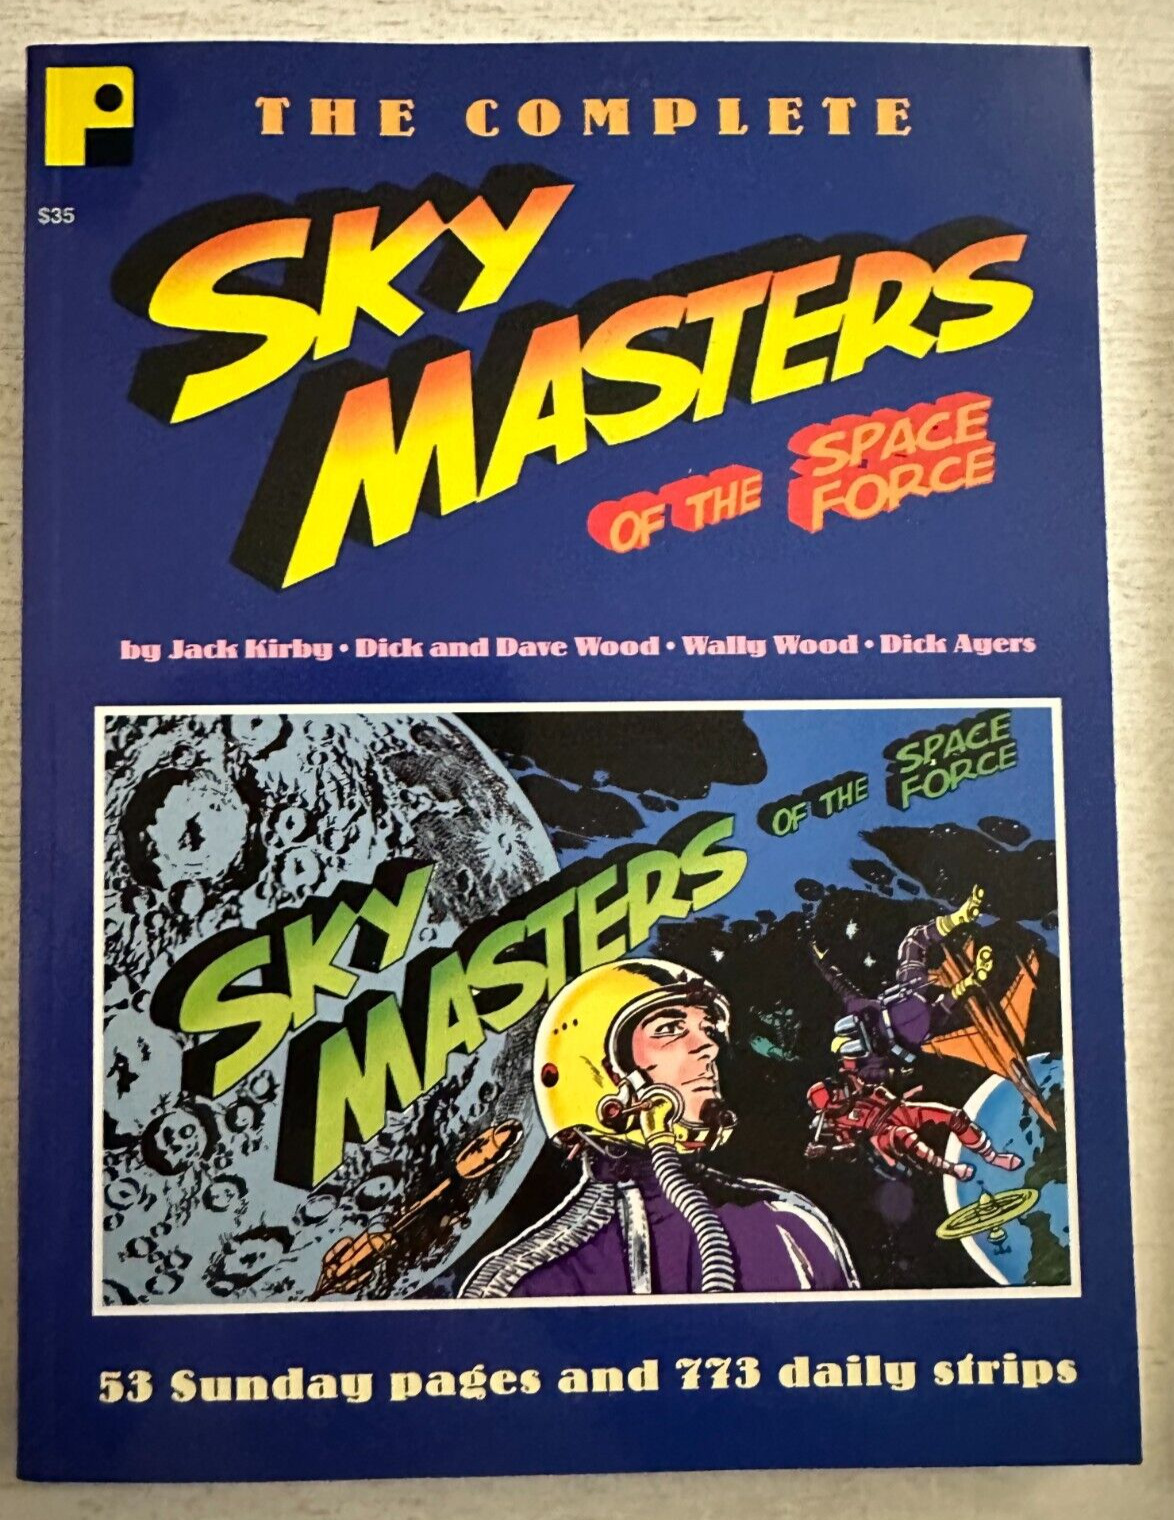 Complete Sky Masters of the Space Force #1 Pure Imagination 8.0 VF (1991)